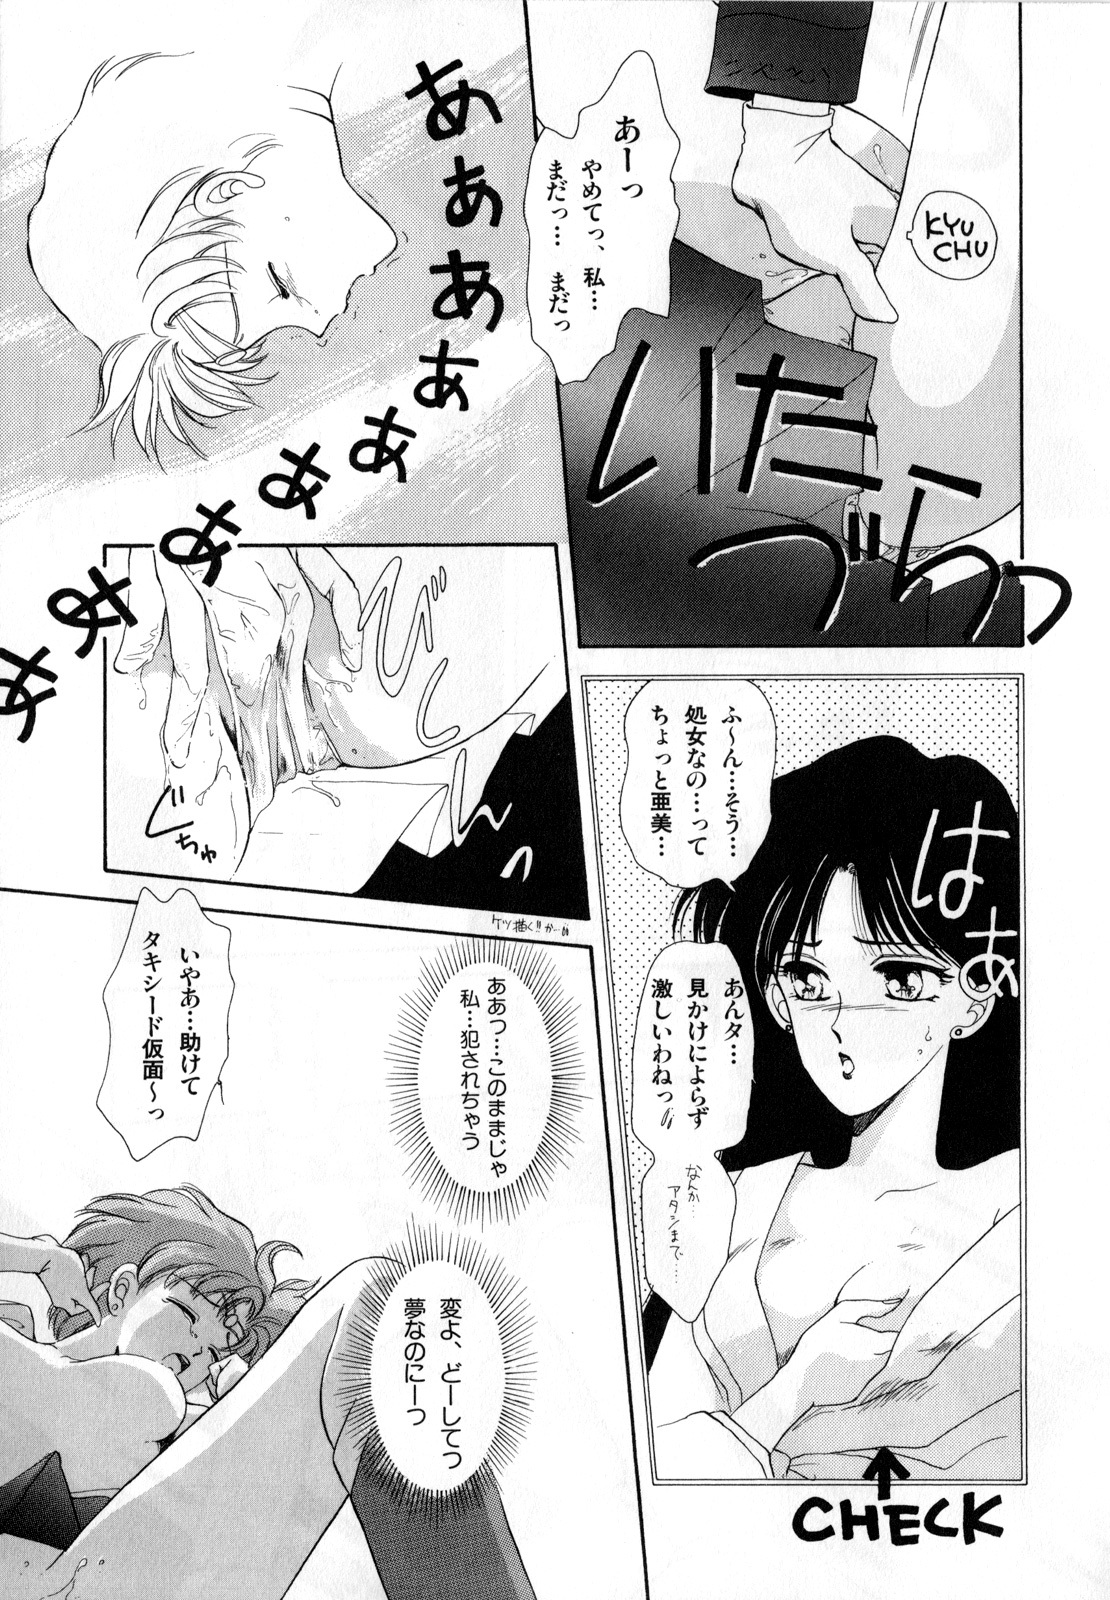 [Anthology] Lunatic Party 1 (Sailor Moon) page 12 full